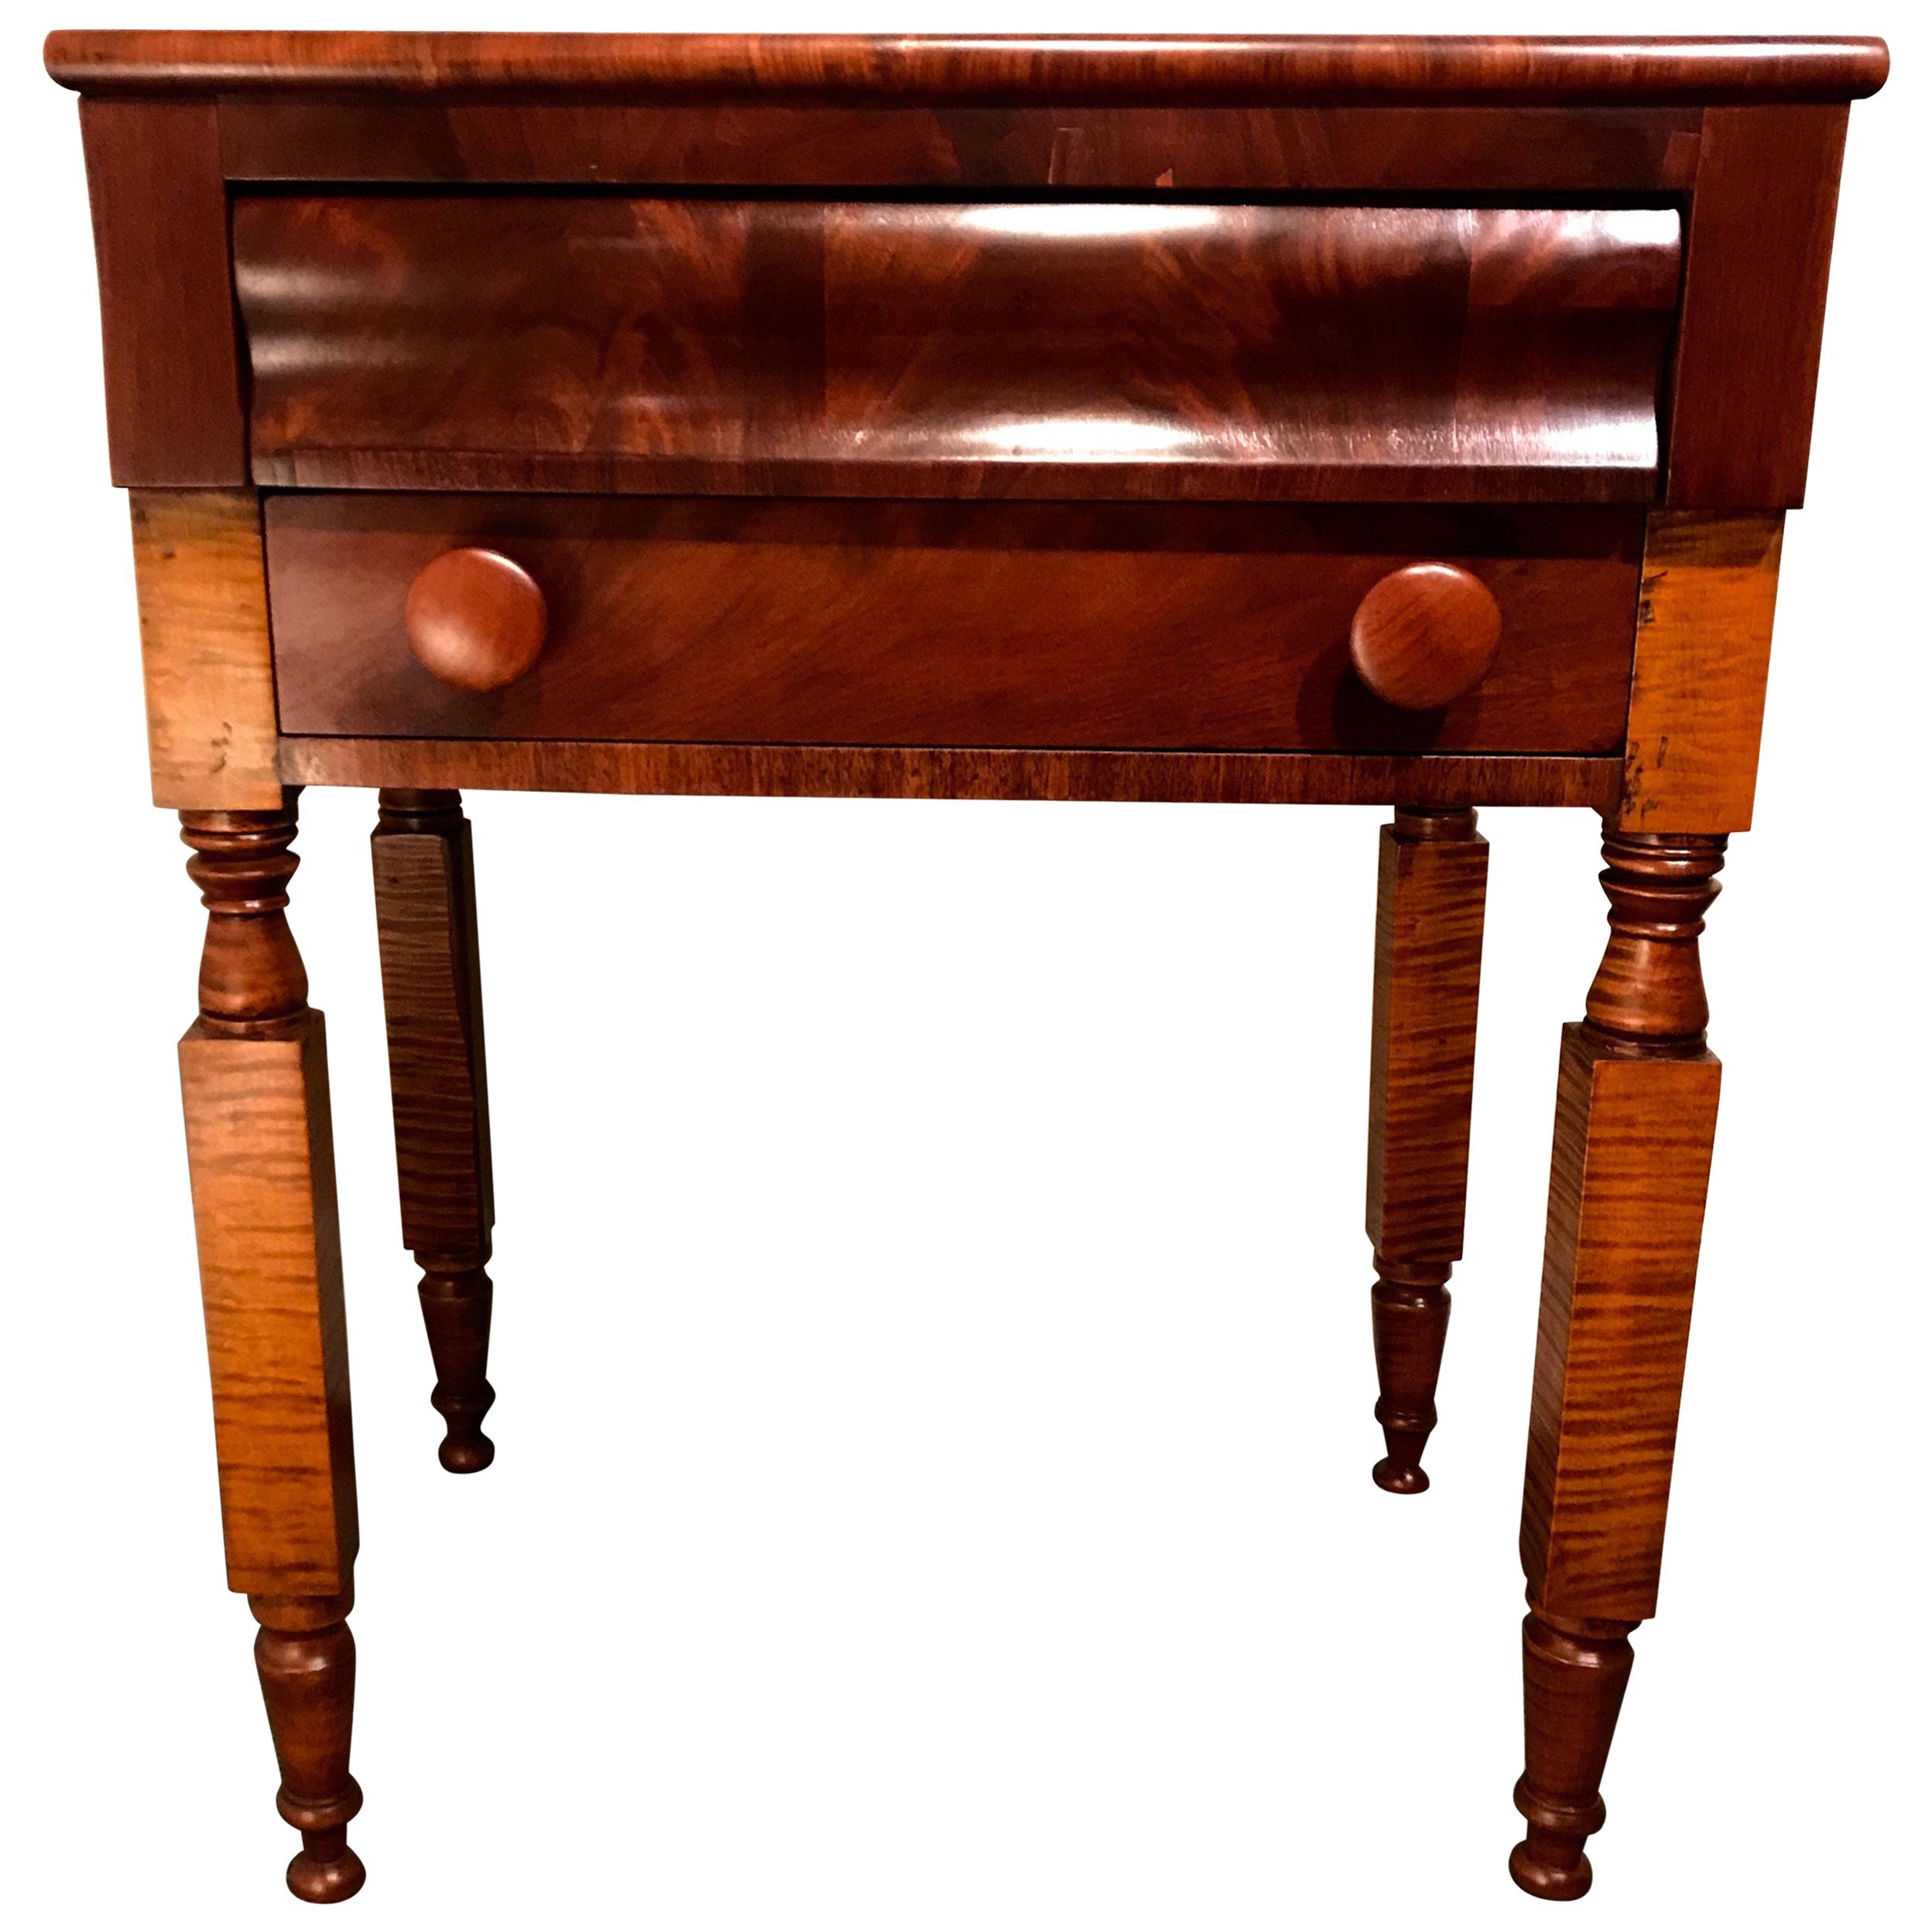 Empire 2-Drawer Stand in Tiger Maple, Cherry and Flamed Mahogany, circa 1820